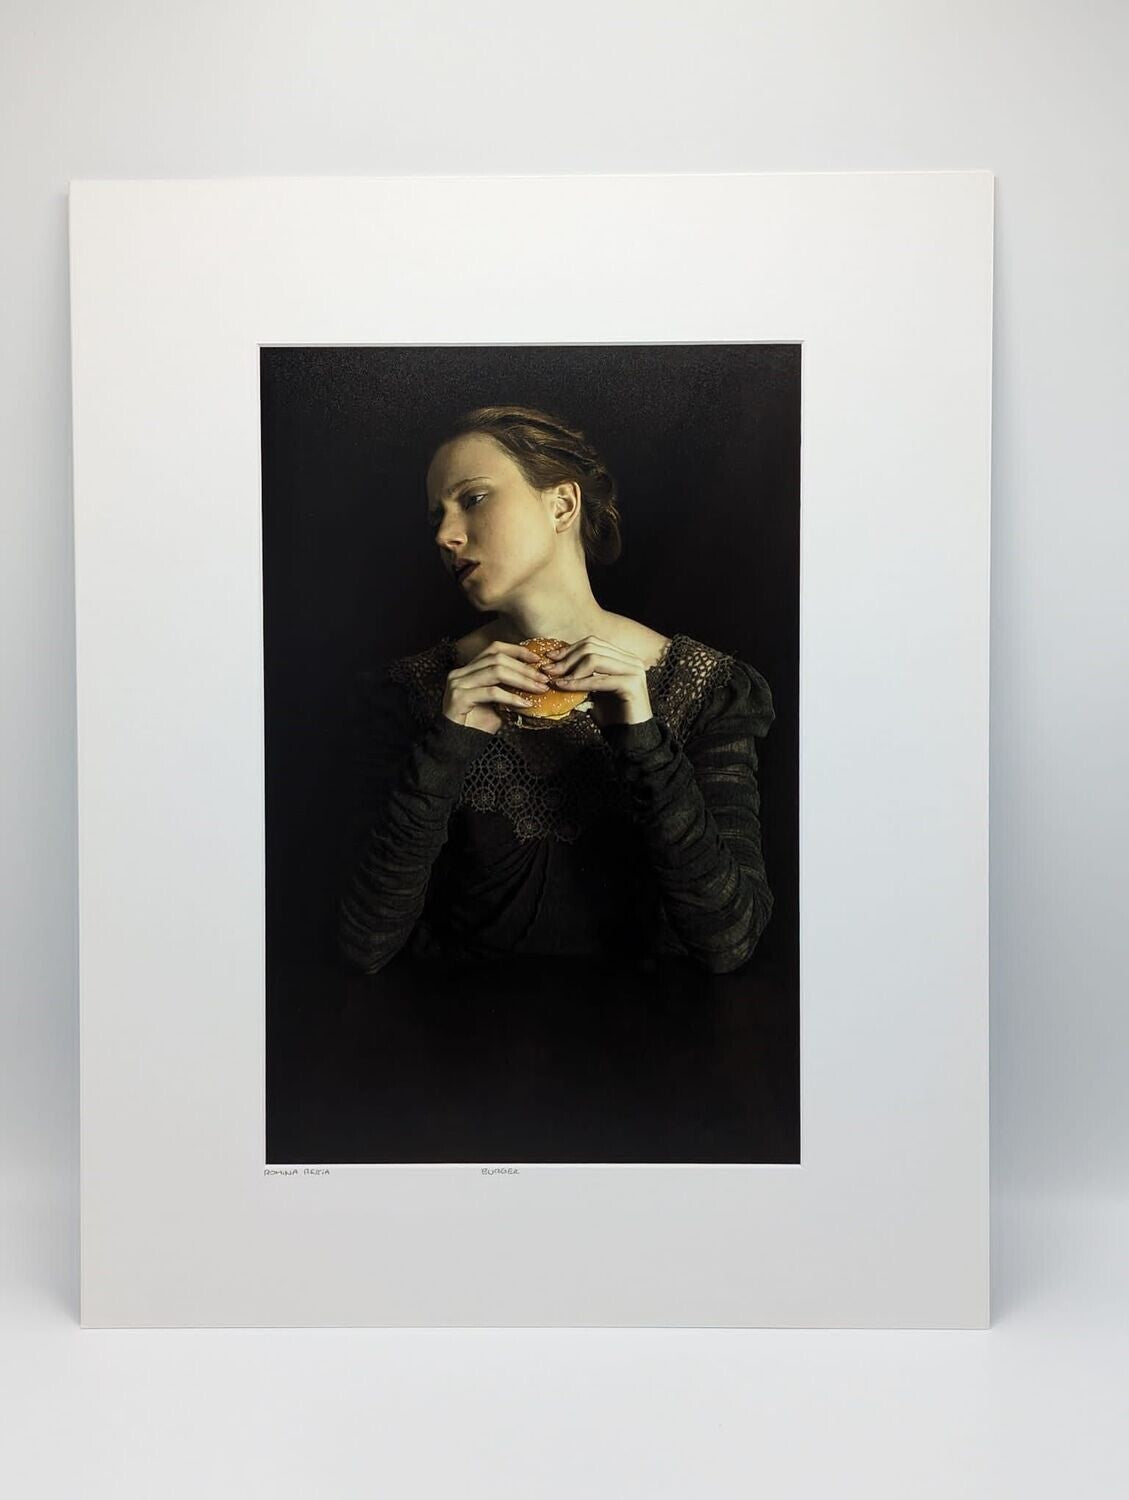 Romina Ressia - Burger - Sold out edition